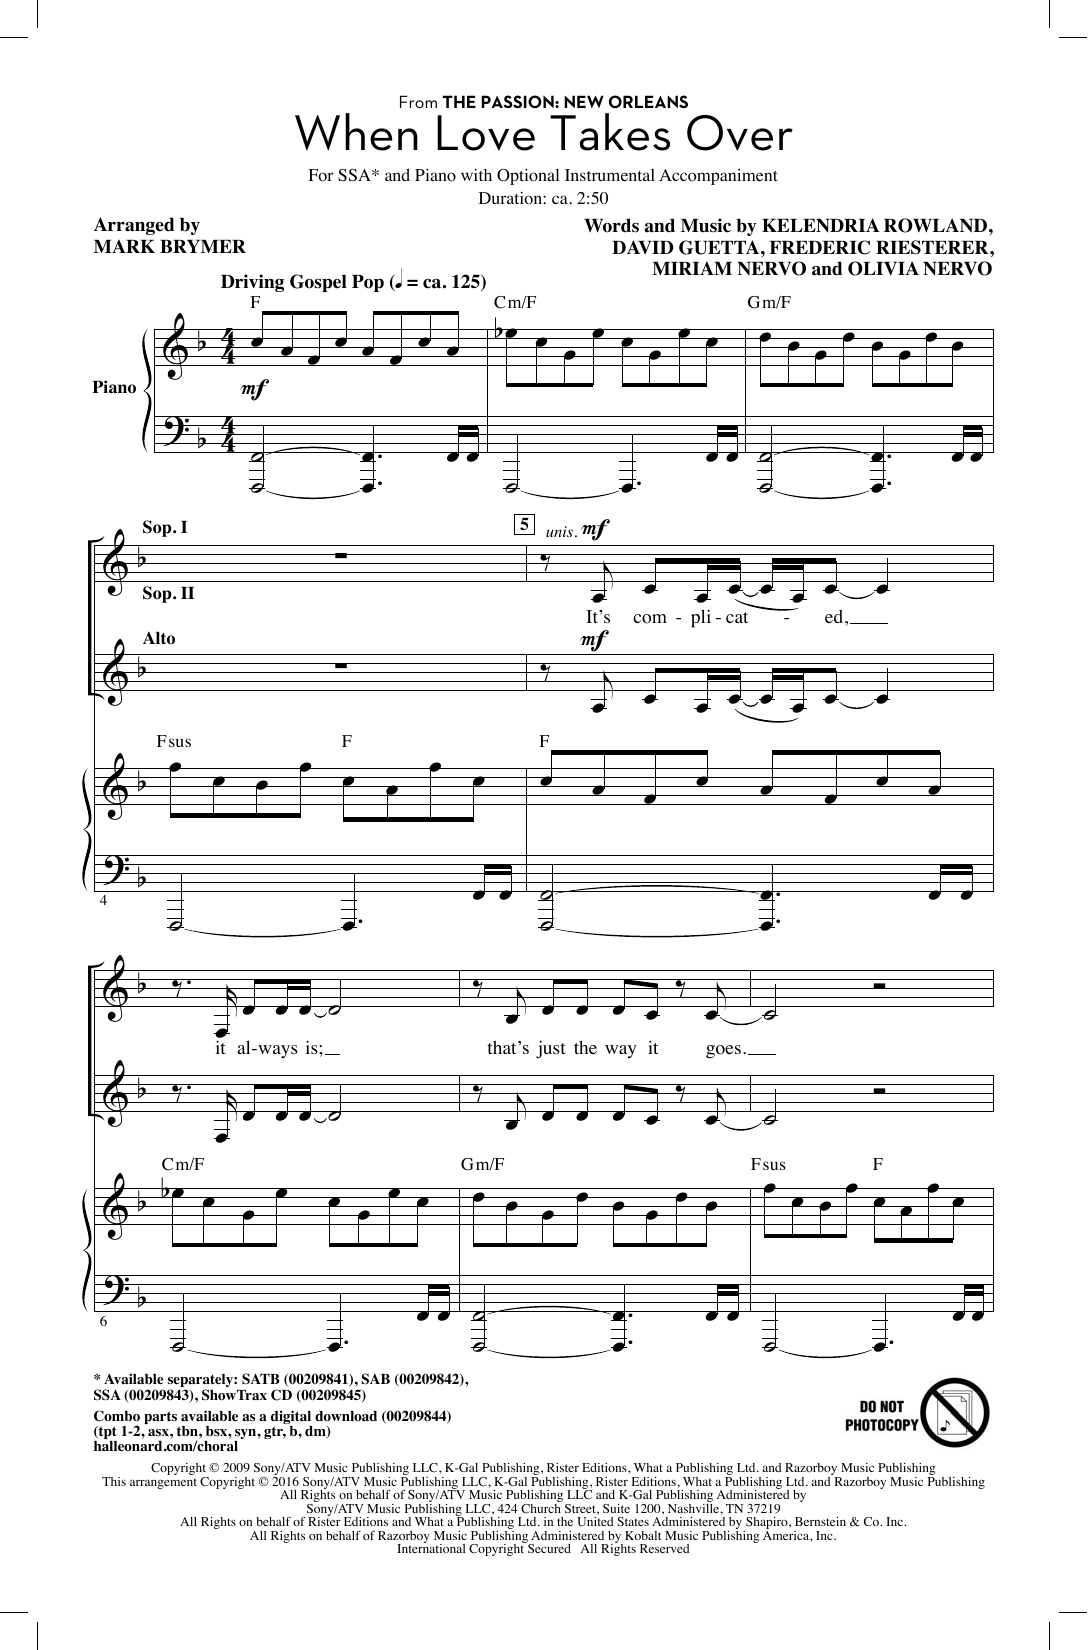 Download Mark Brymer When Love Takes Over Sheet Music